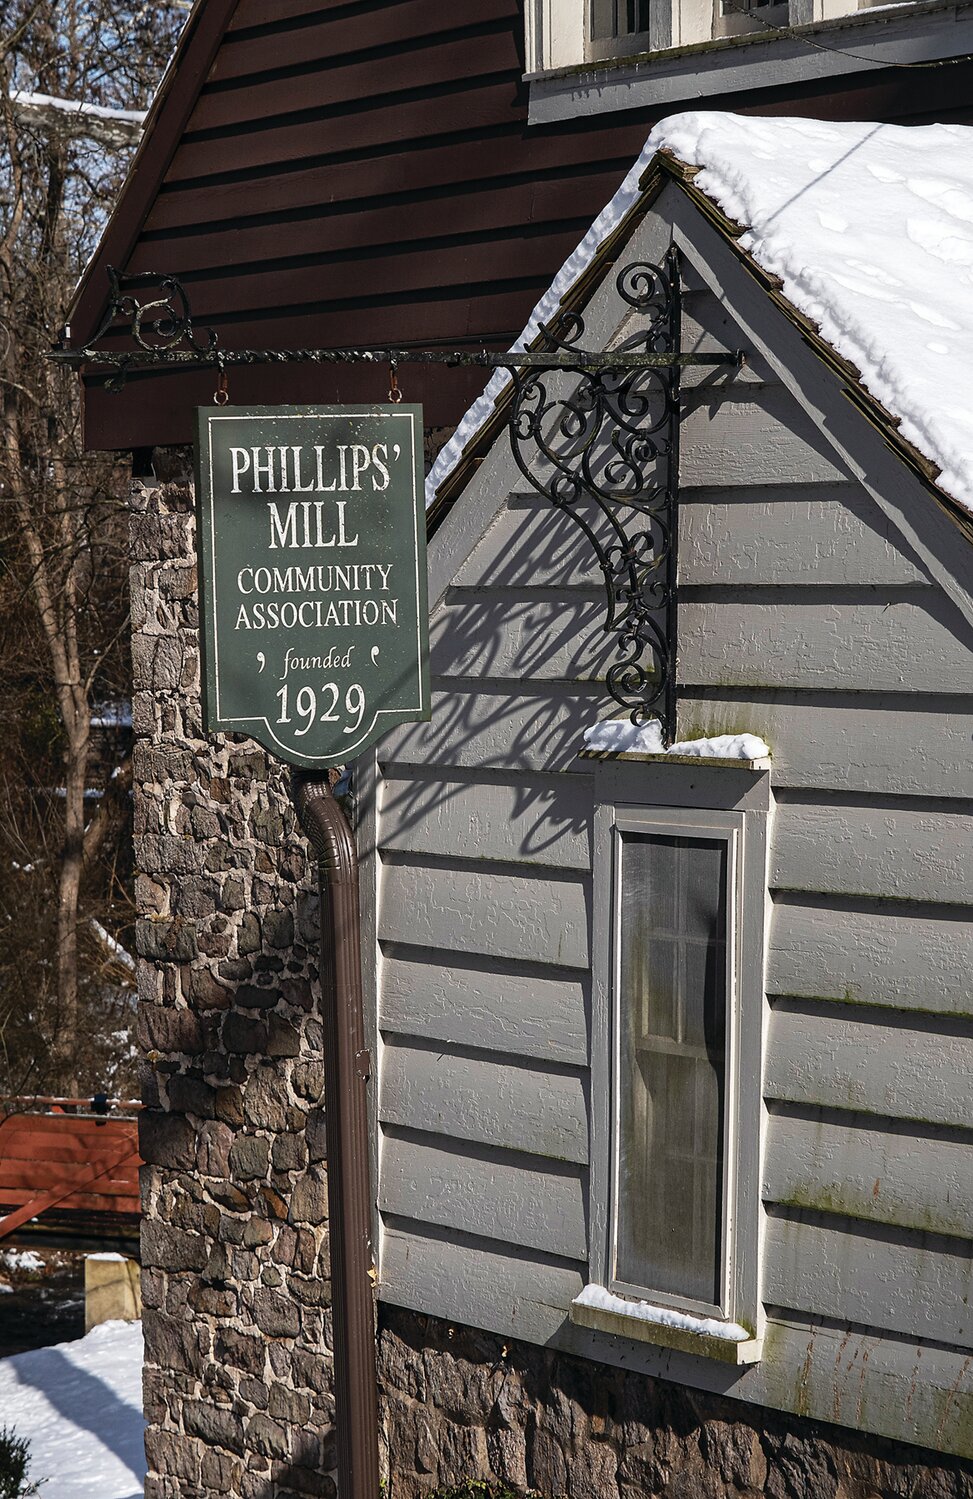 The Phillips’ Mill Community Association has been a welcoming home to artists since 1929.